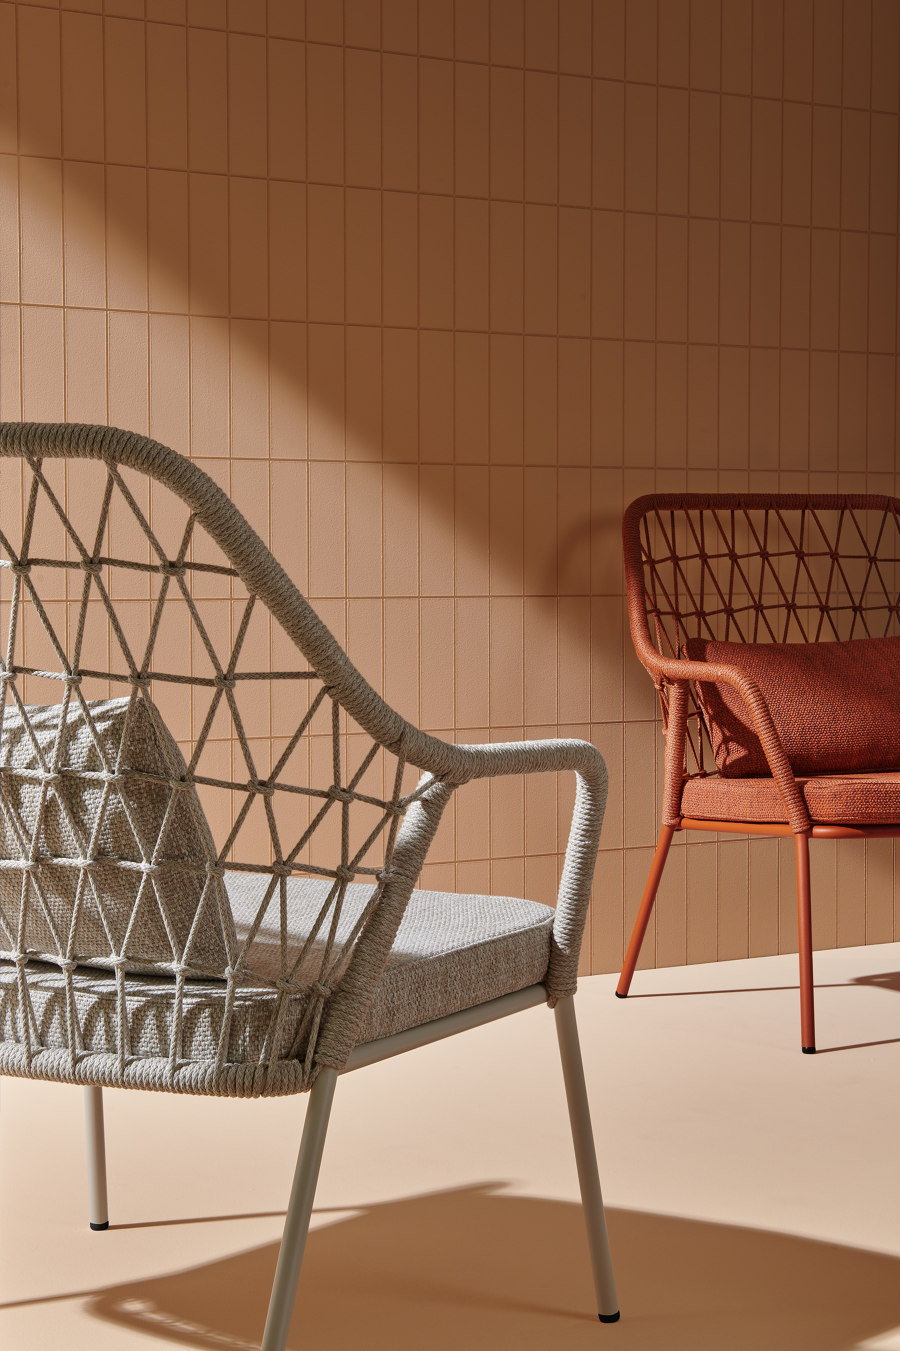 It's elementary: new outdoor furniture from Pedrali | Novedades